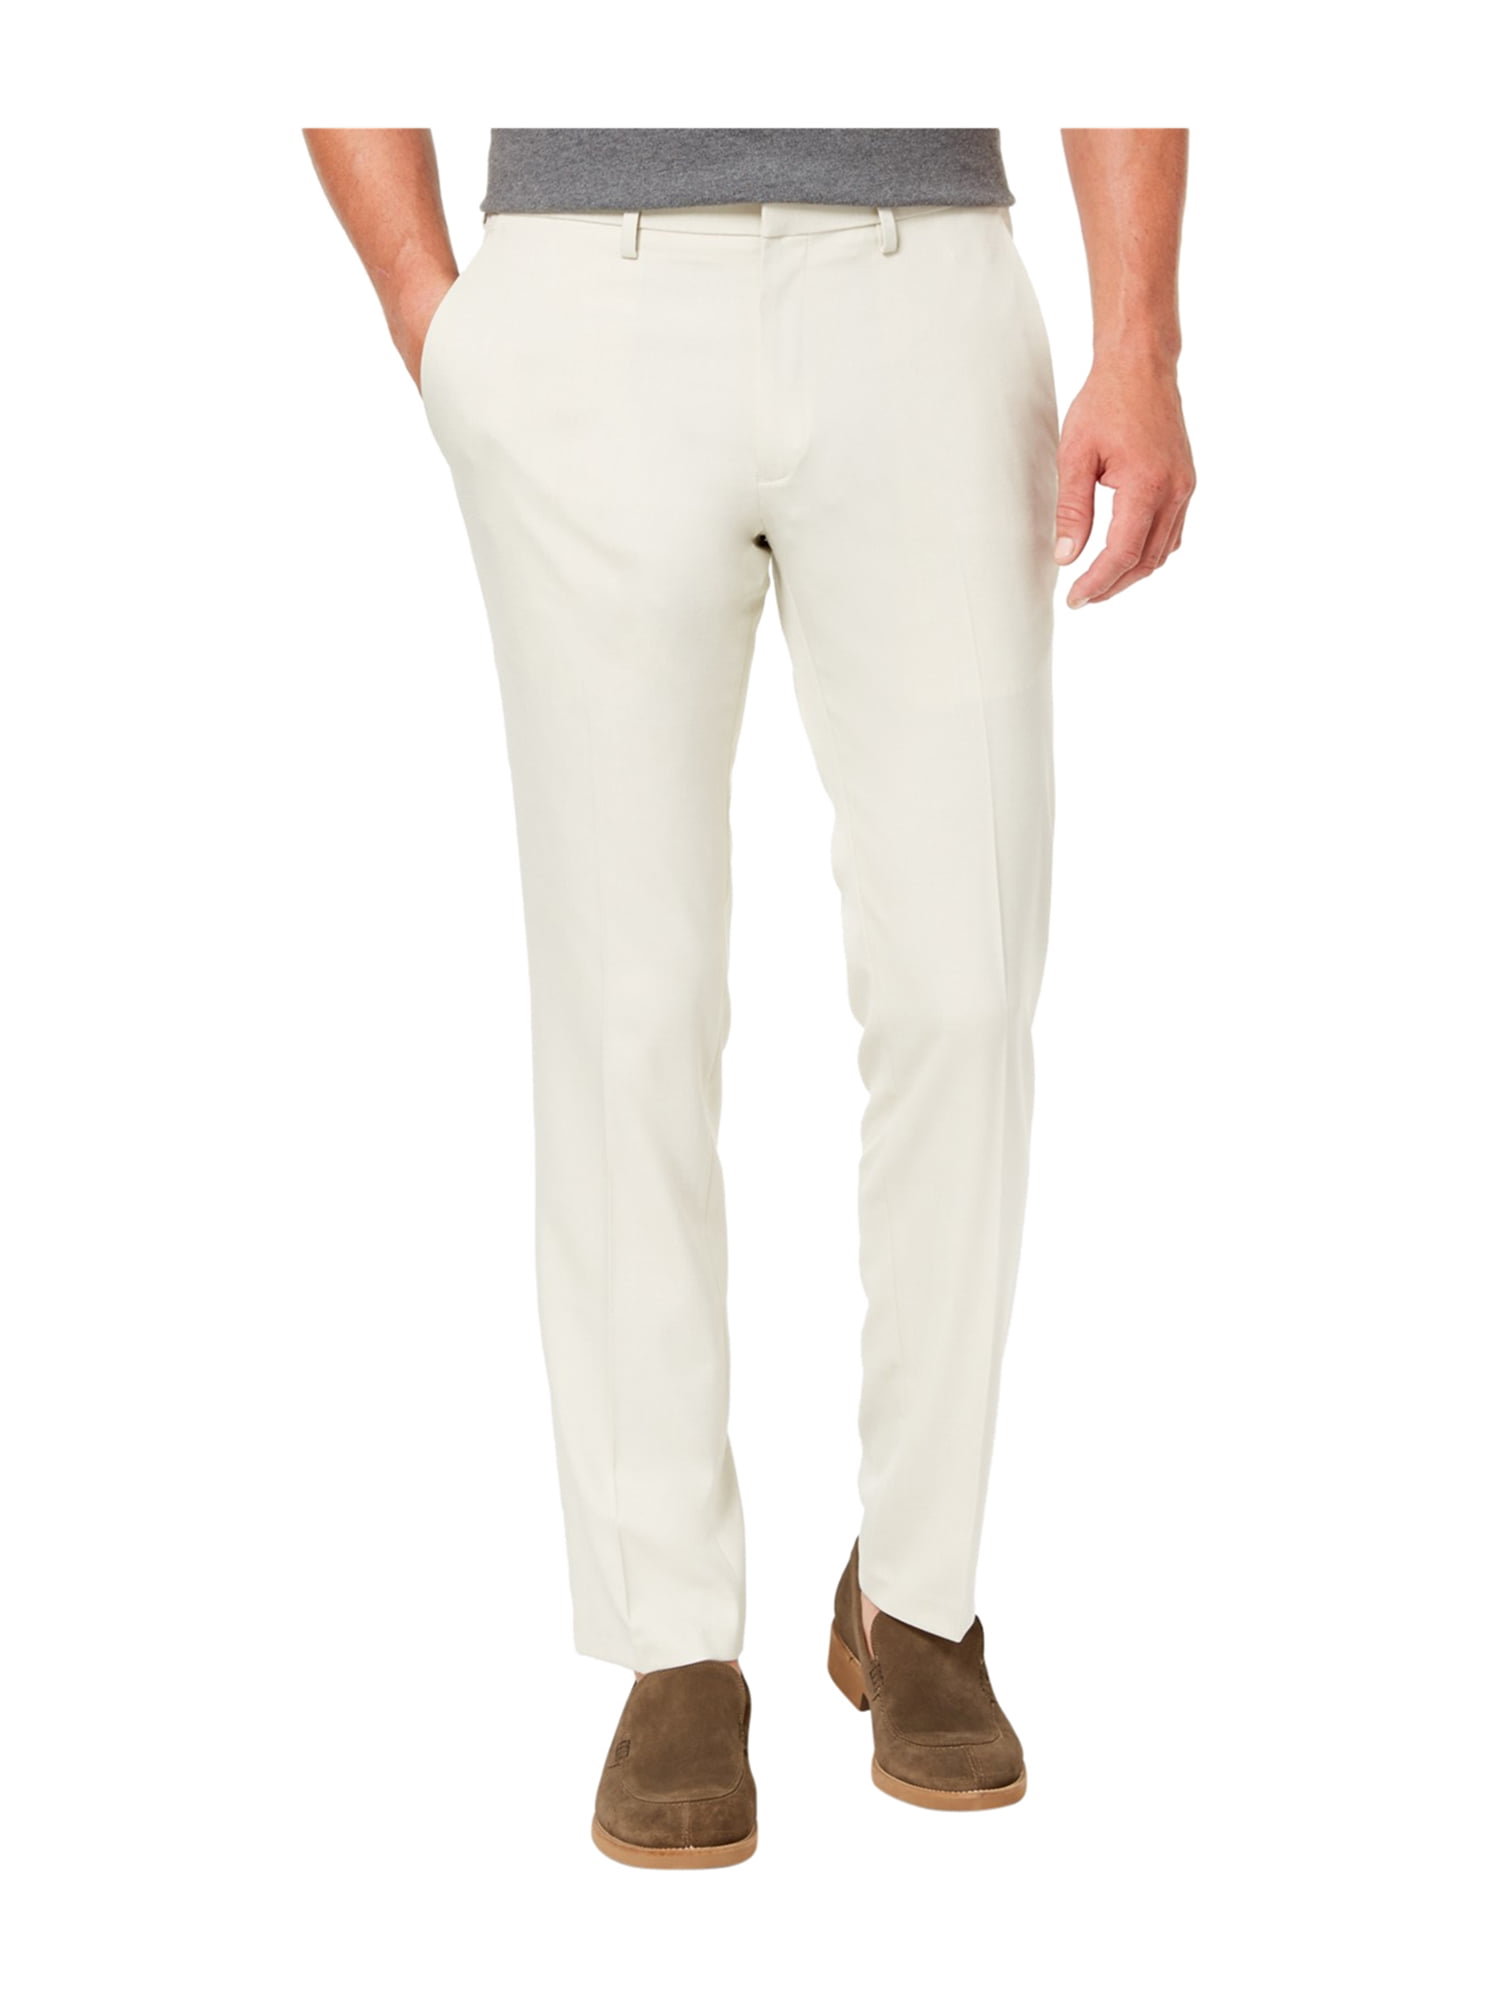 Raymond Grey Slim Fit Flat Front Trousers